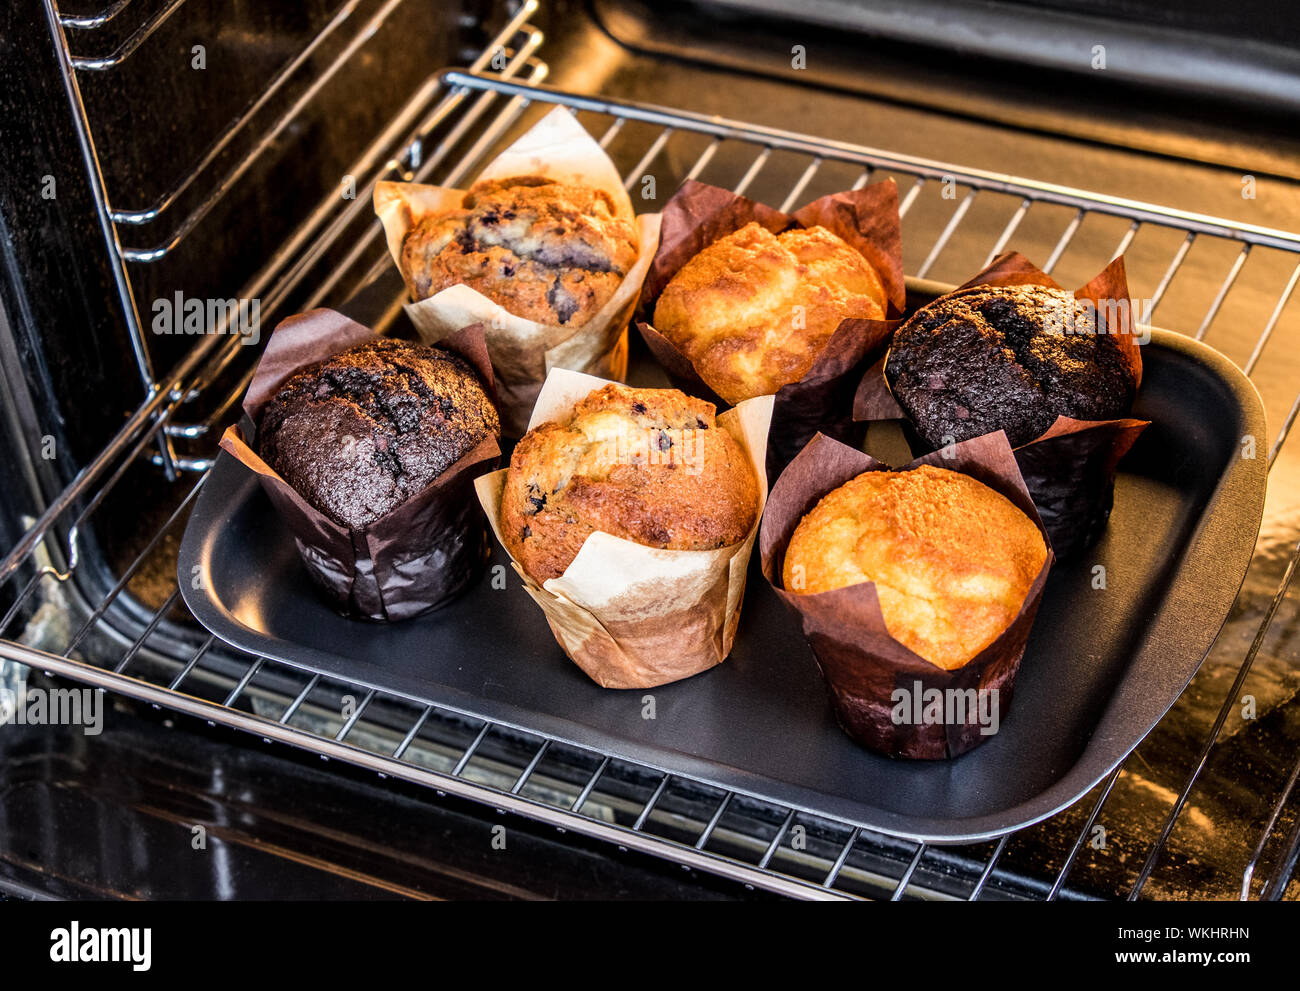 Baking muffins in the oven. Cooking in the oven Stock Photo - Alamy